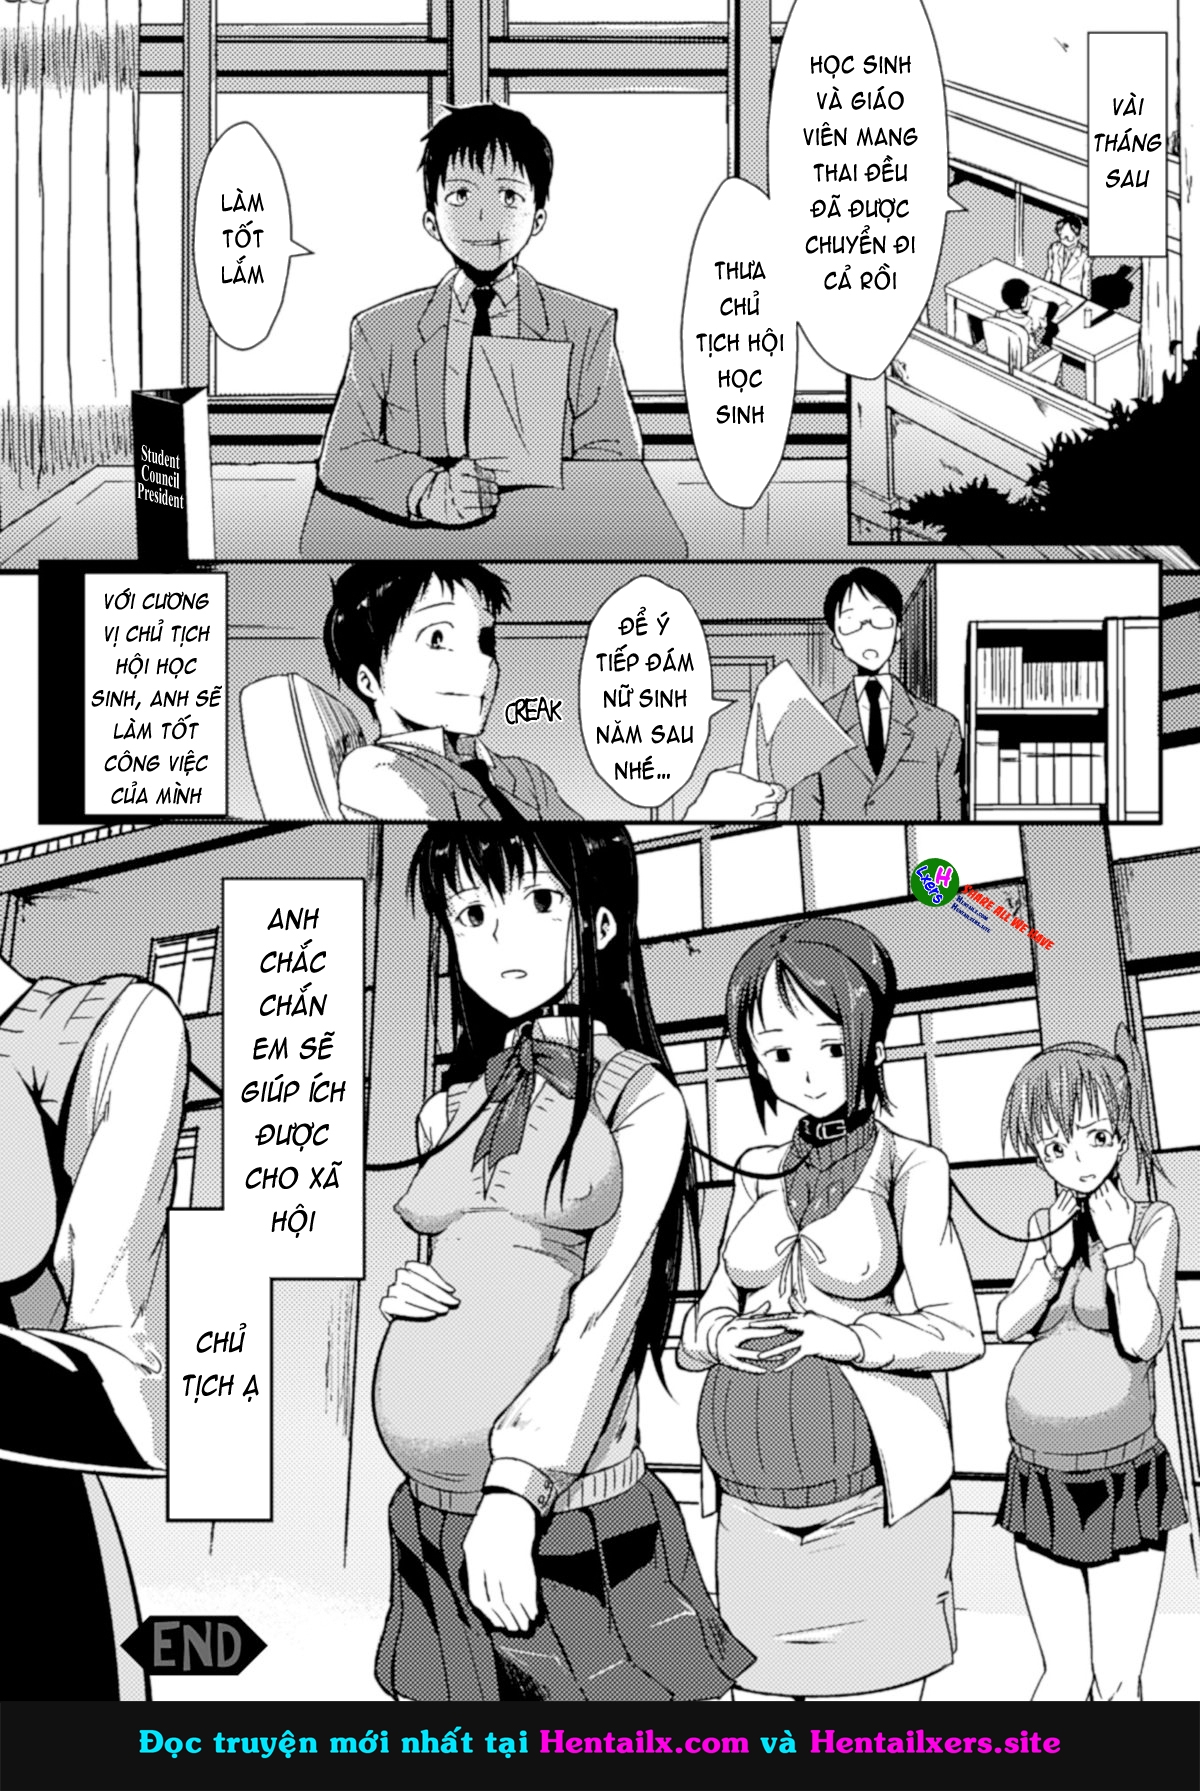 Xem ảnh Drop Out - Chapter 9 END - 1606921471212_0 - Hentai24h.Tv